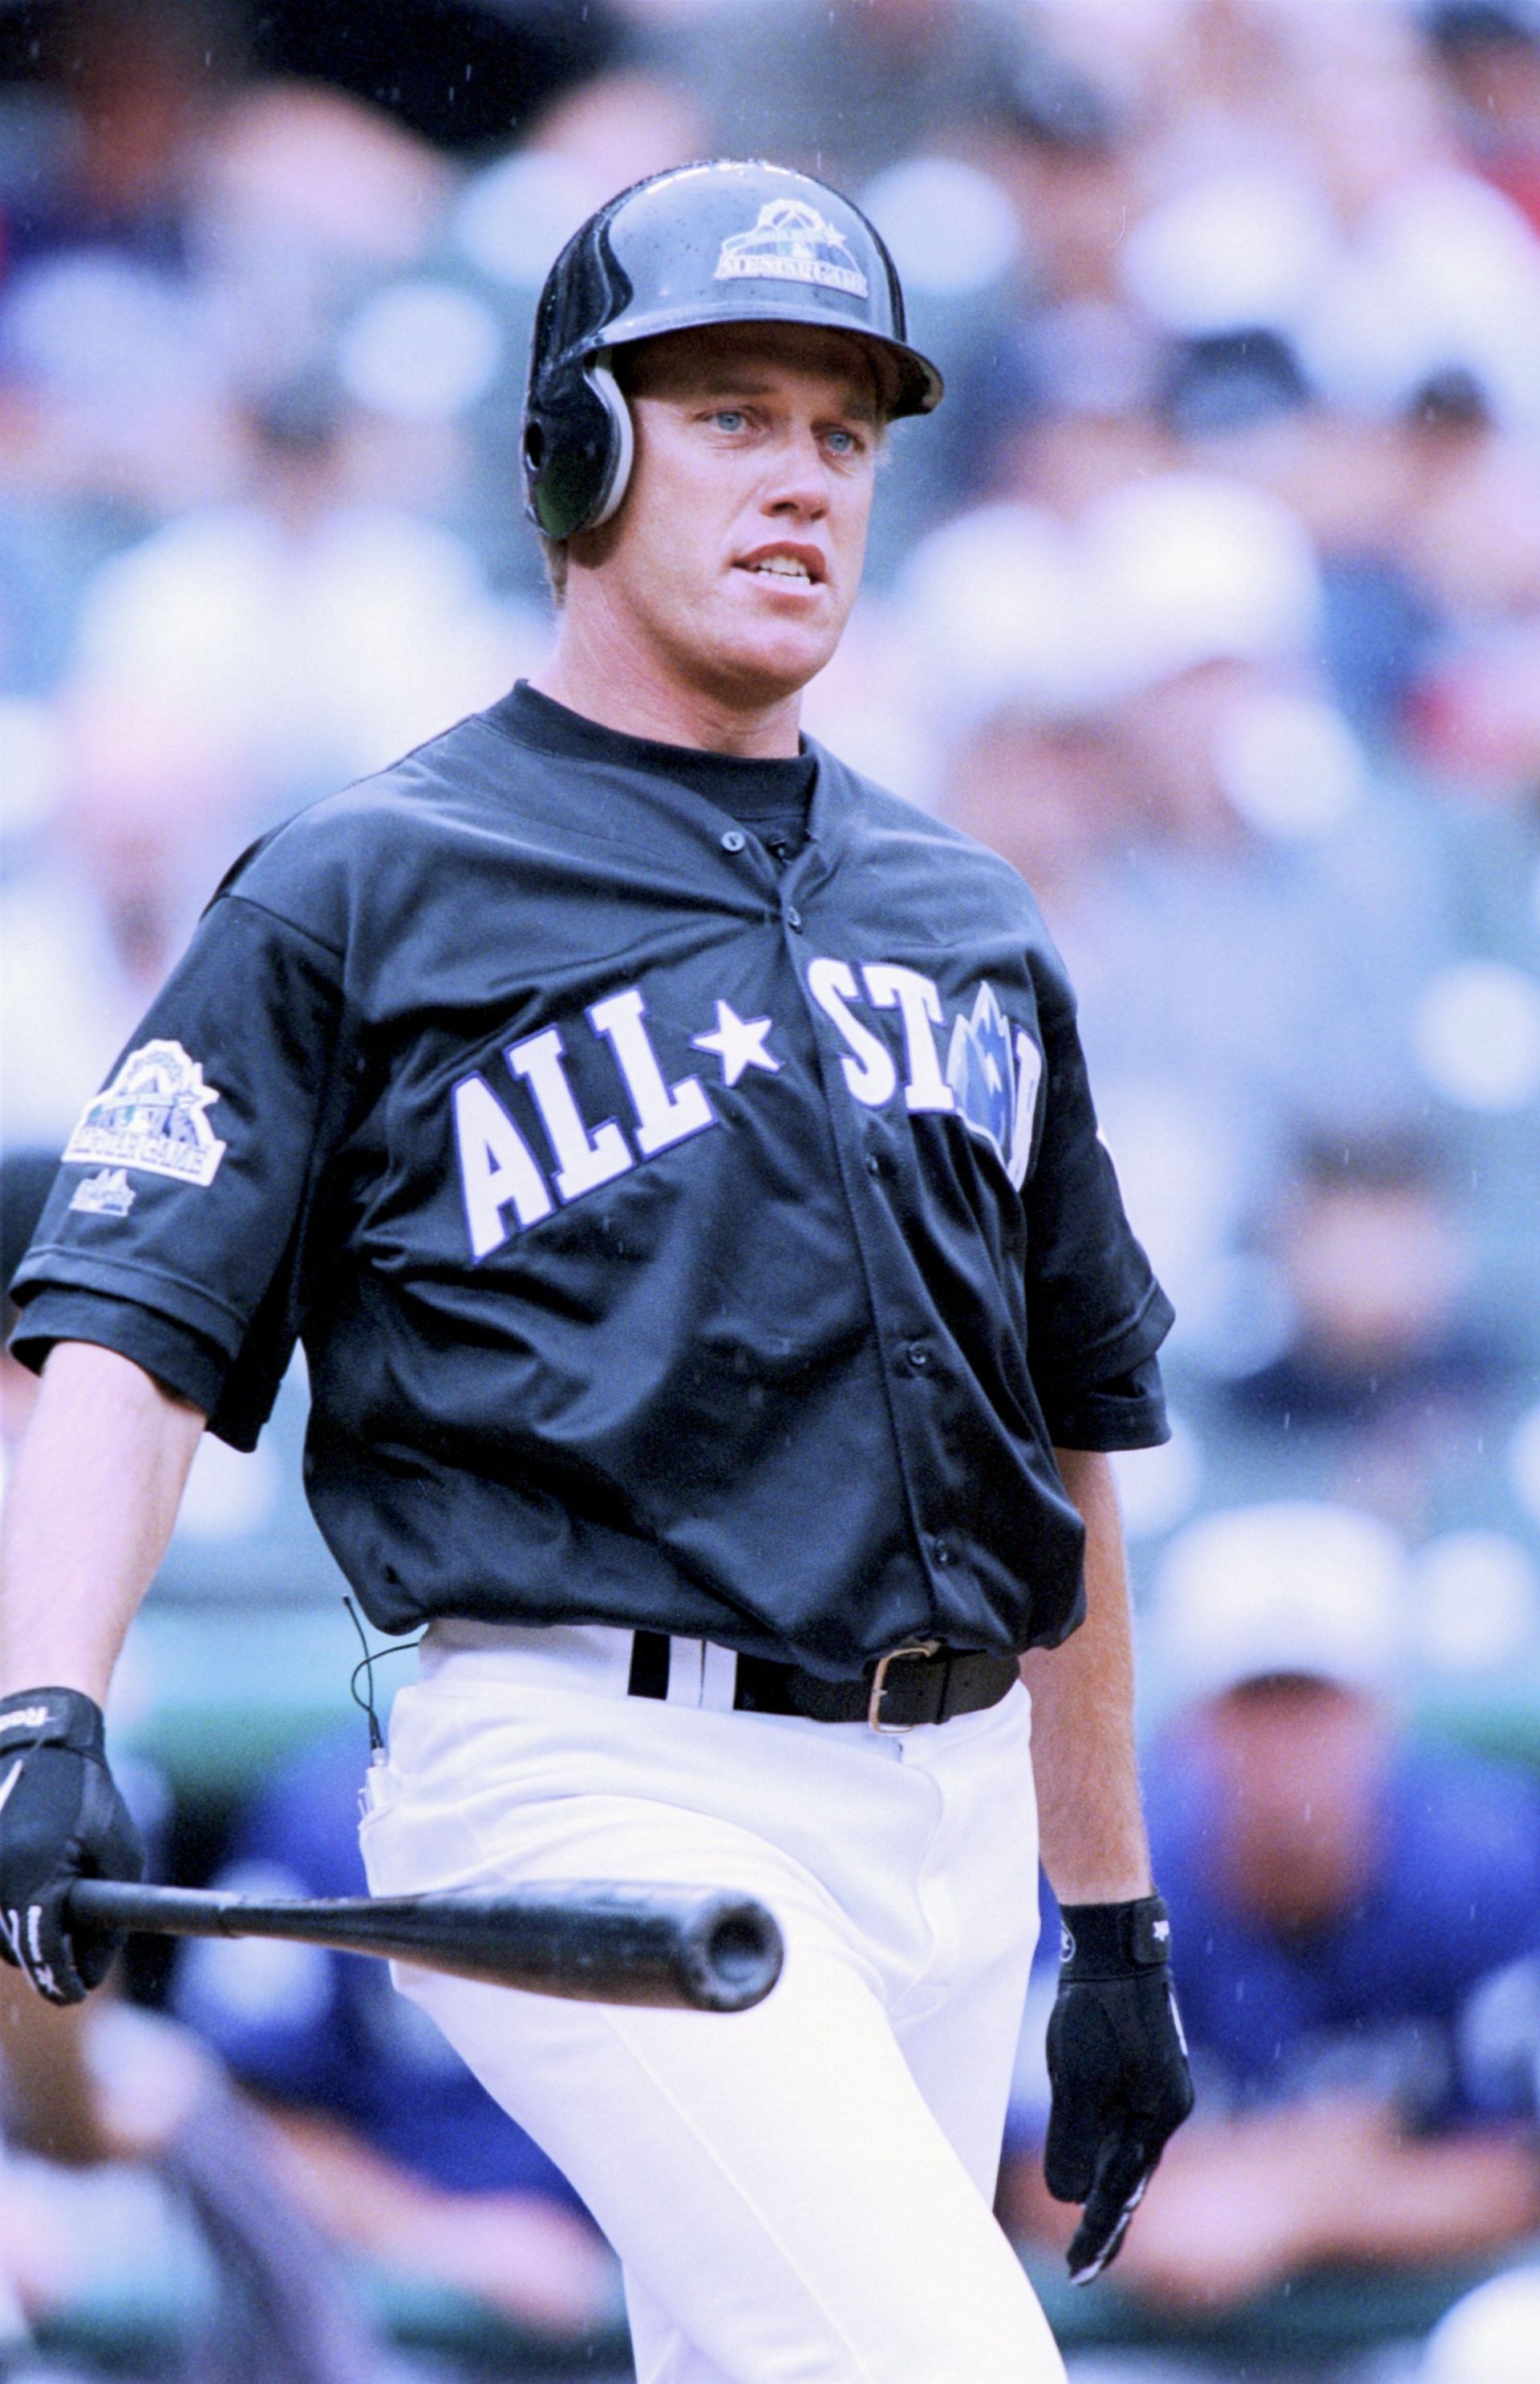 John Elway at the 1998 All Star Celebrity Home Run Derby.